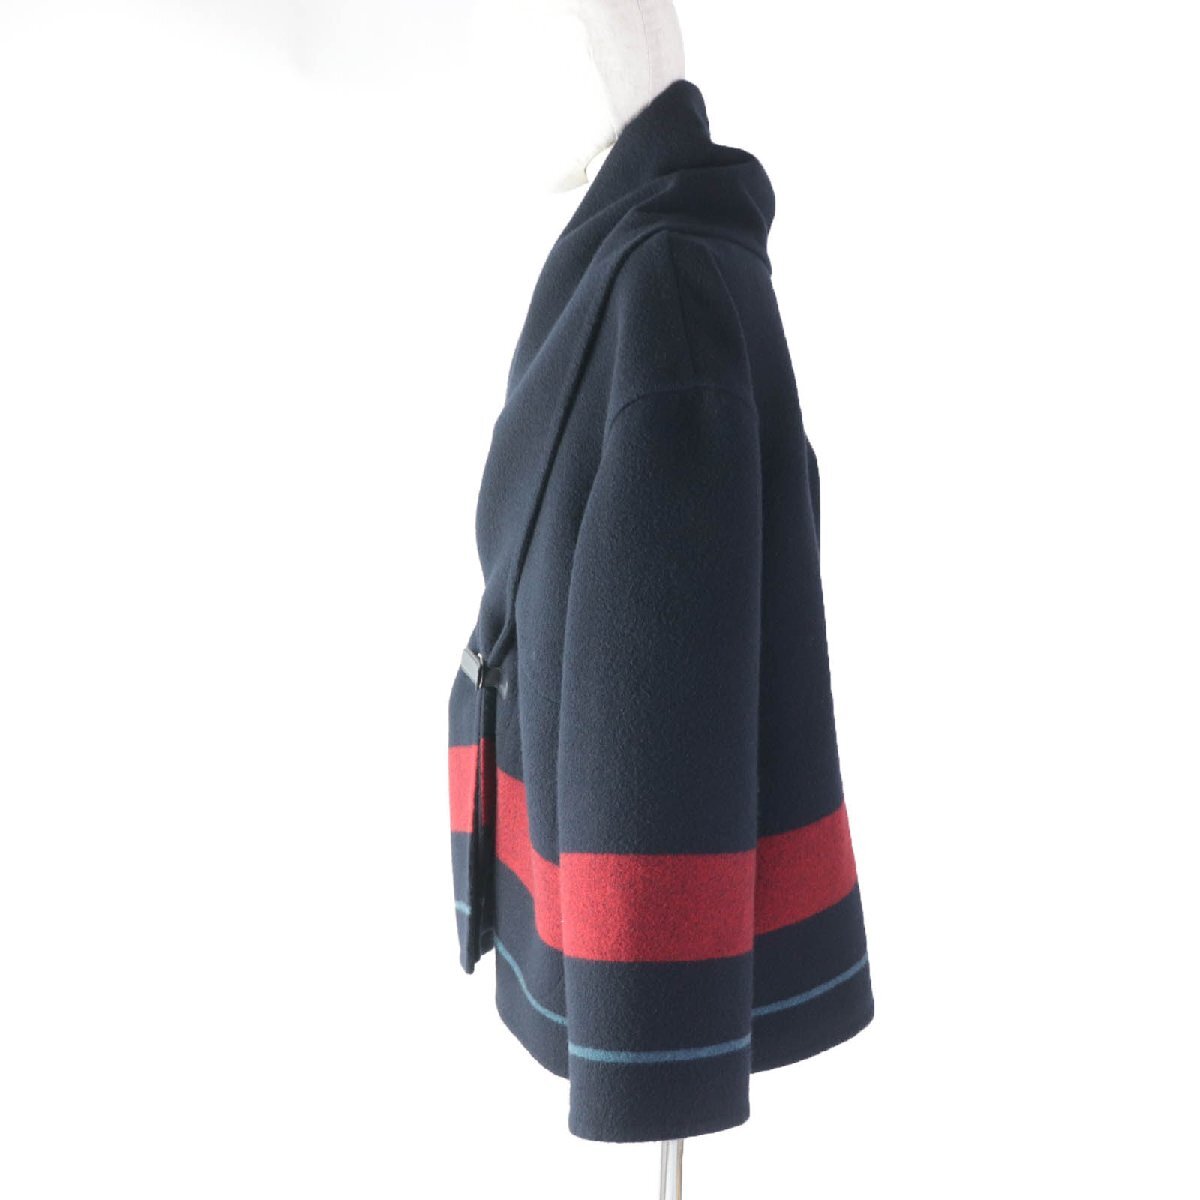  beautiful goods *HERMES Hermes cashmere 100% leather using ro cover ru poncho coat navy Red Bull -36 France made lady's 